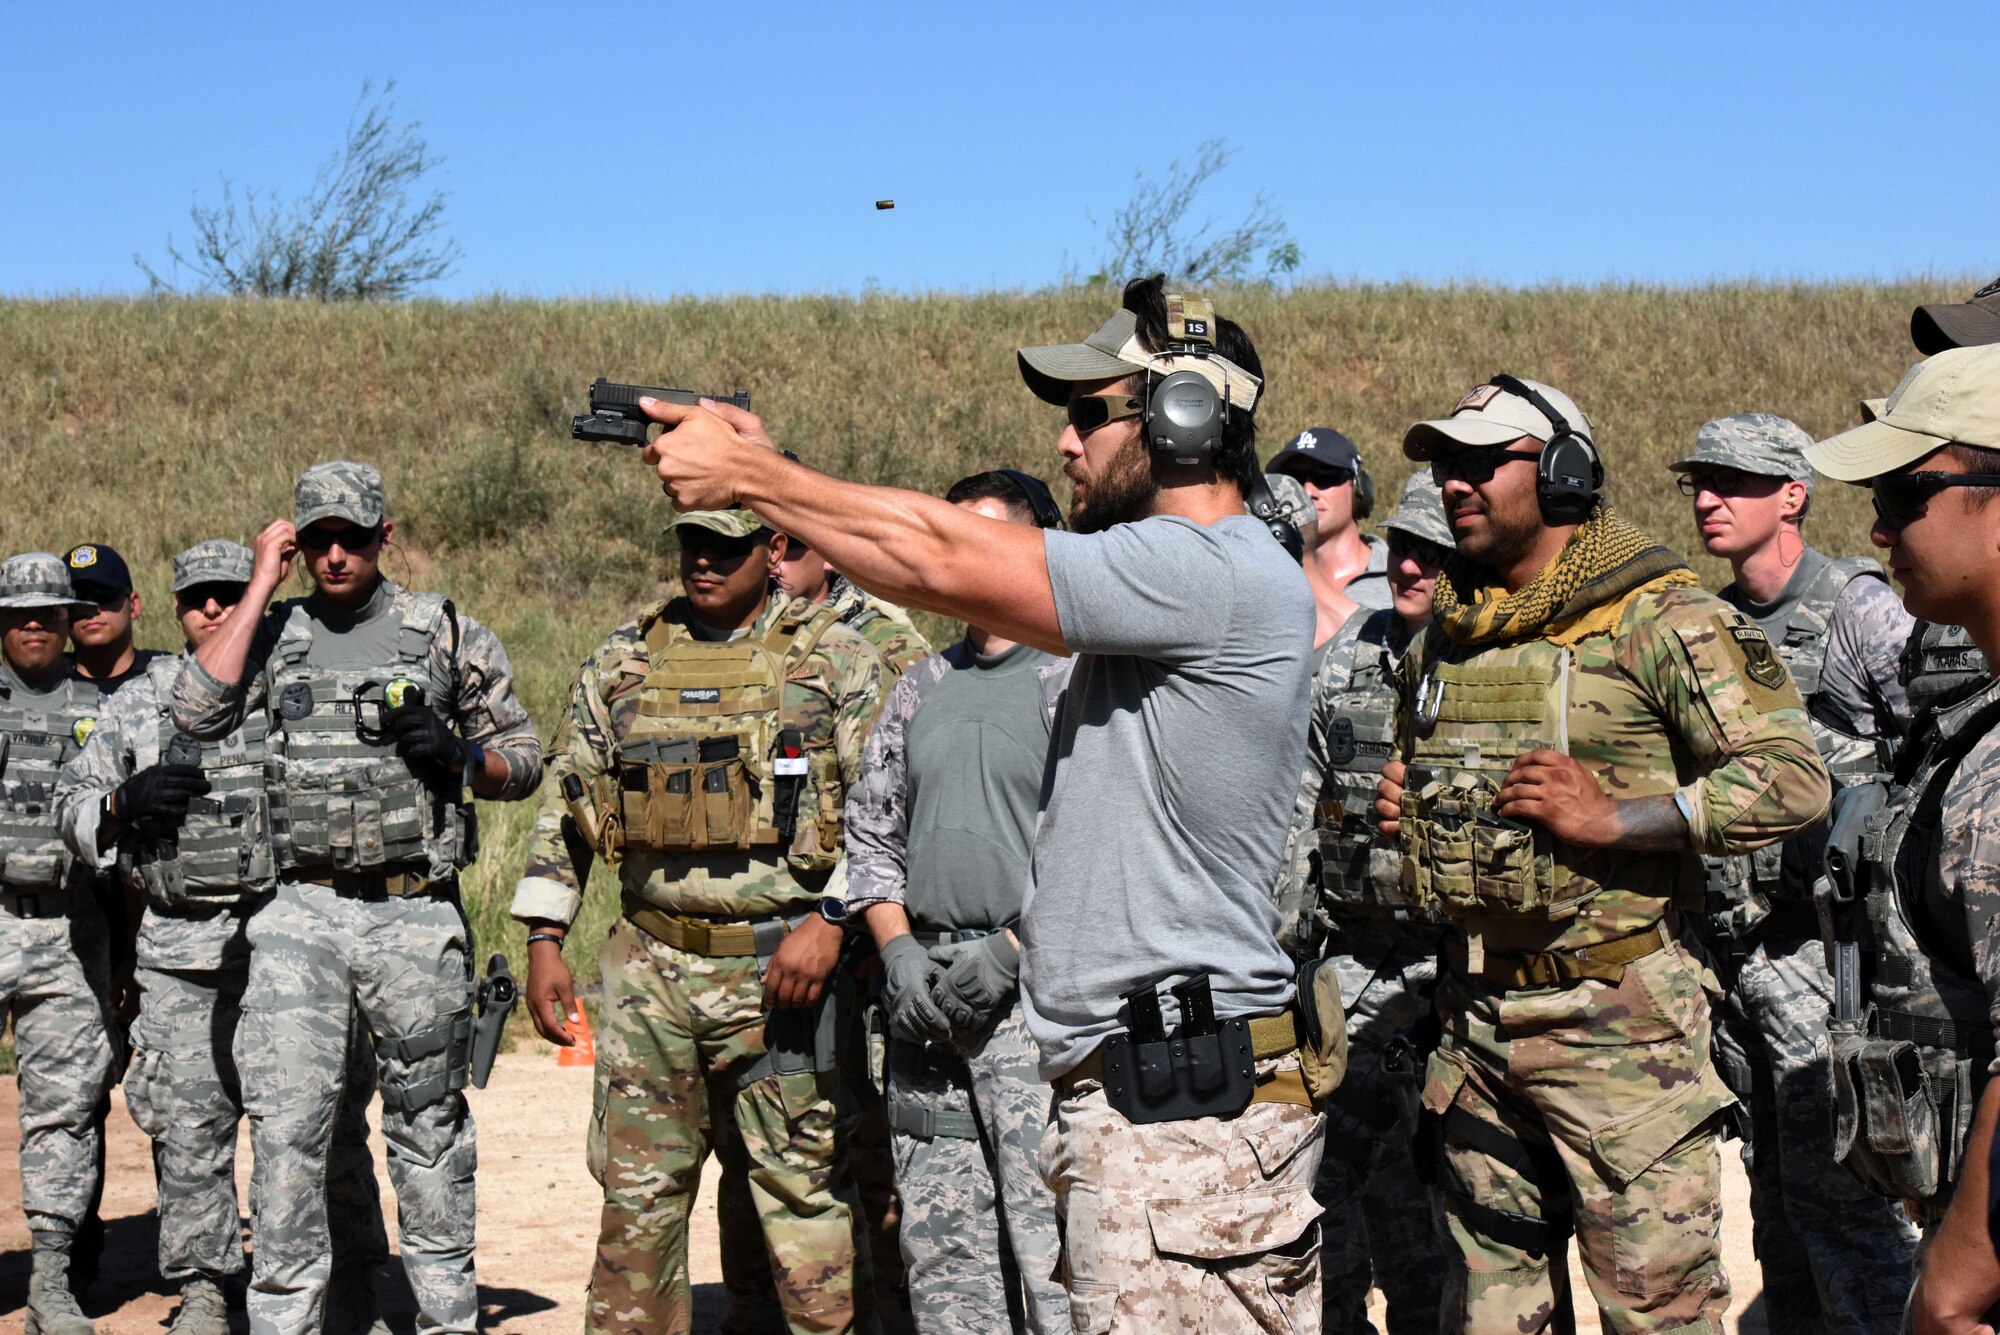 The Shooting Institute chief executive officer, Jared Hudson, demonstrates how to fire a pistol during the Special Weapons and Tactics and Close Quarters Combat training at the Goodfellow Air Force Base shooting range in San Angelo, Texas, May 9, 2018. Students learned how to properly handle a pistol to hit targets quickly, without harming non-targets. (U.S. Air Force photo by Airman 1st Class Seraiah Hines/Released)